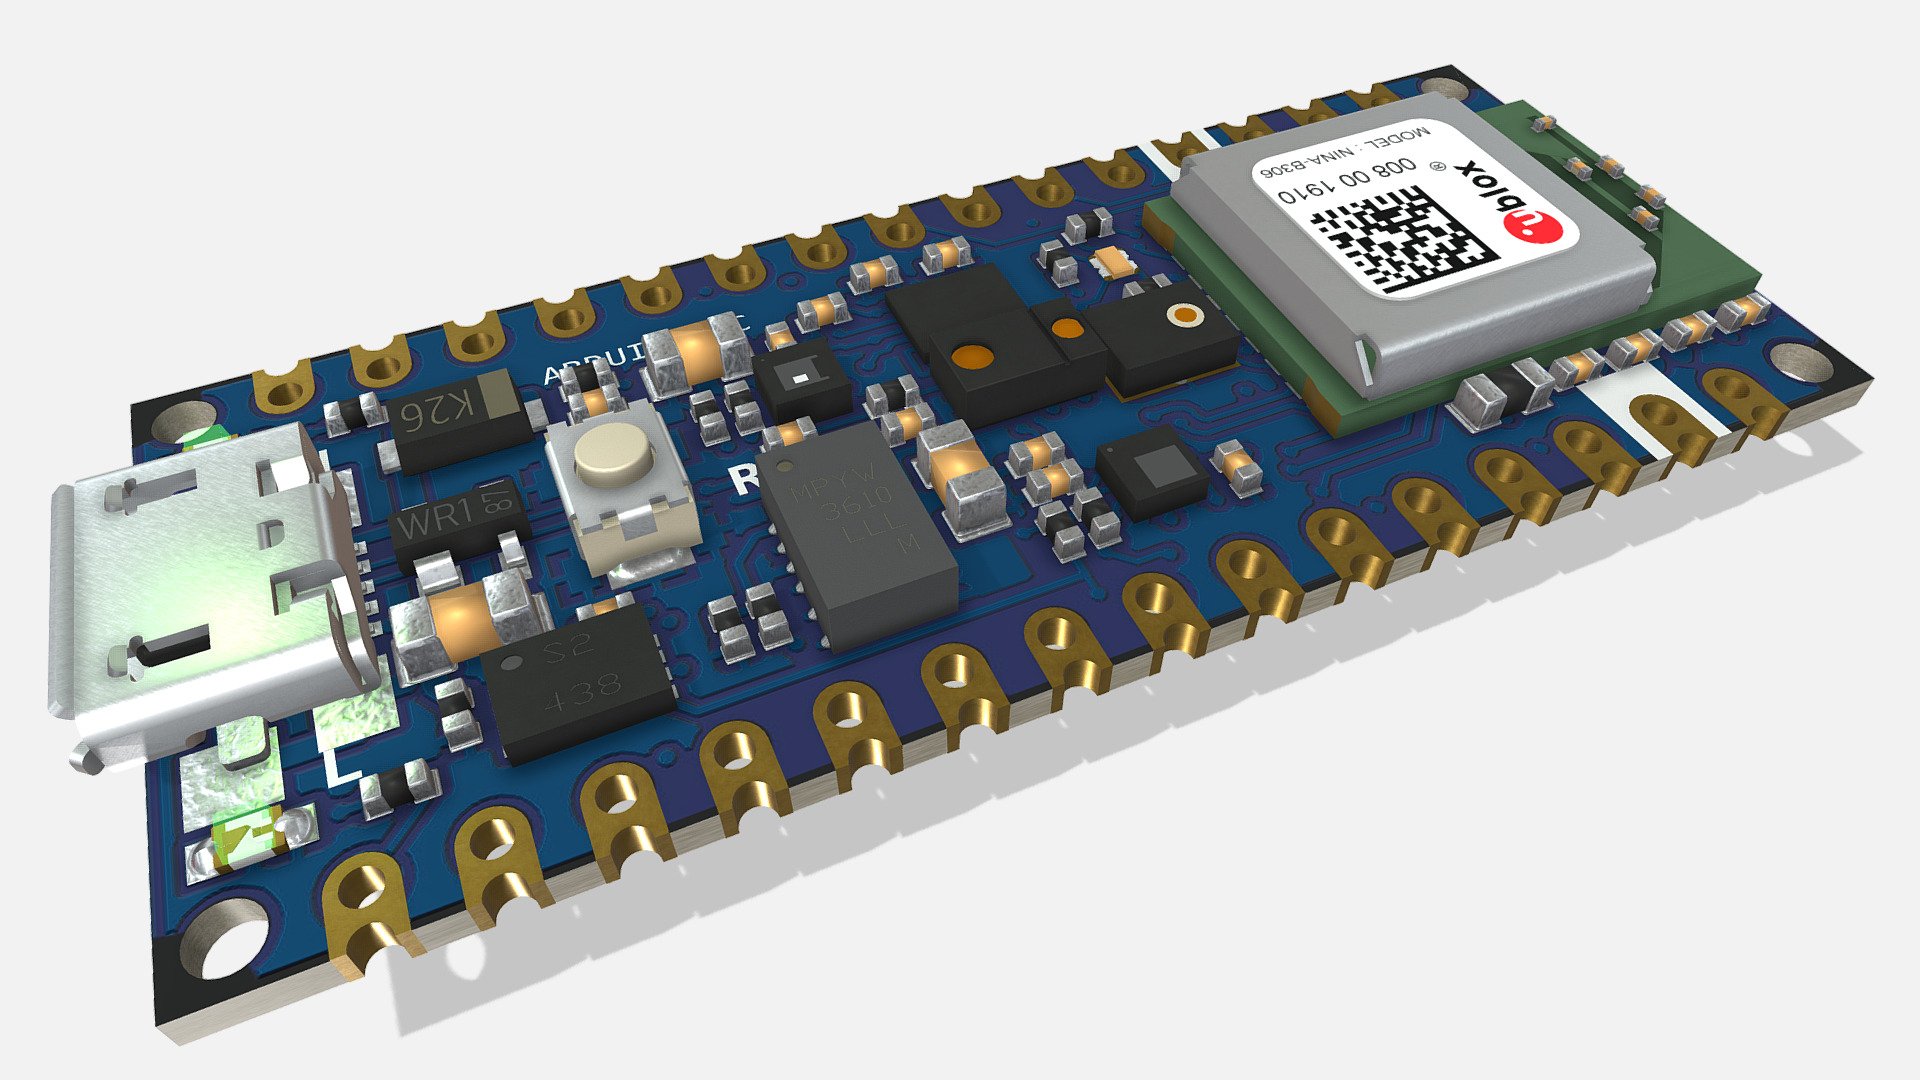 3D Model of the ARDUINO Nano 33 BLE SENSE. Description is visible here : https://store.arduino.cc/arduino-nano-33-ble-sense

Model designed from the EAGLE files availble in the web site and with blender tools v2.79.

All components can be modified (translate, delete,…). Don’t hesitate to comment somes hardware references that you want to see in sketchfab - Arduino Nano 33 BLE SENSE - Buy Royalty Free 3D model by F2A (@Fa_Sketch) 3d model